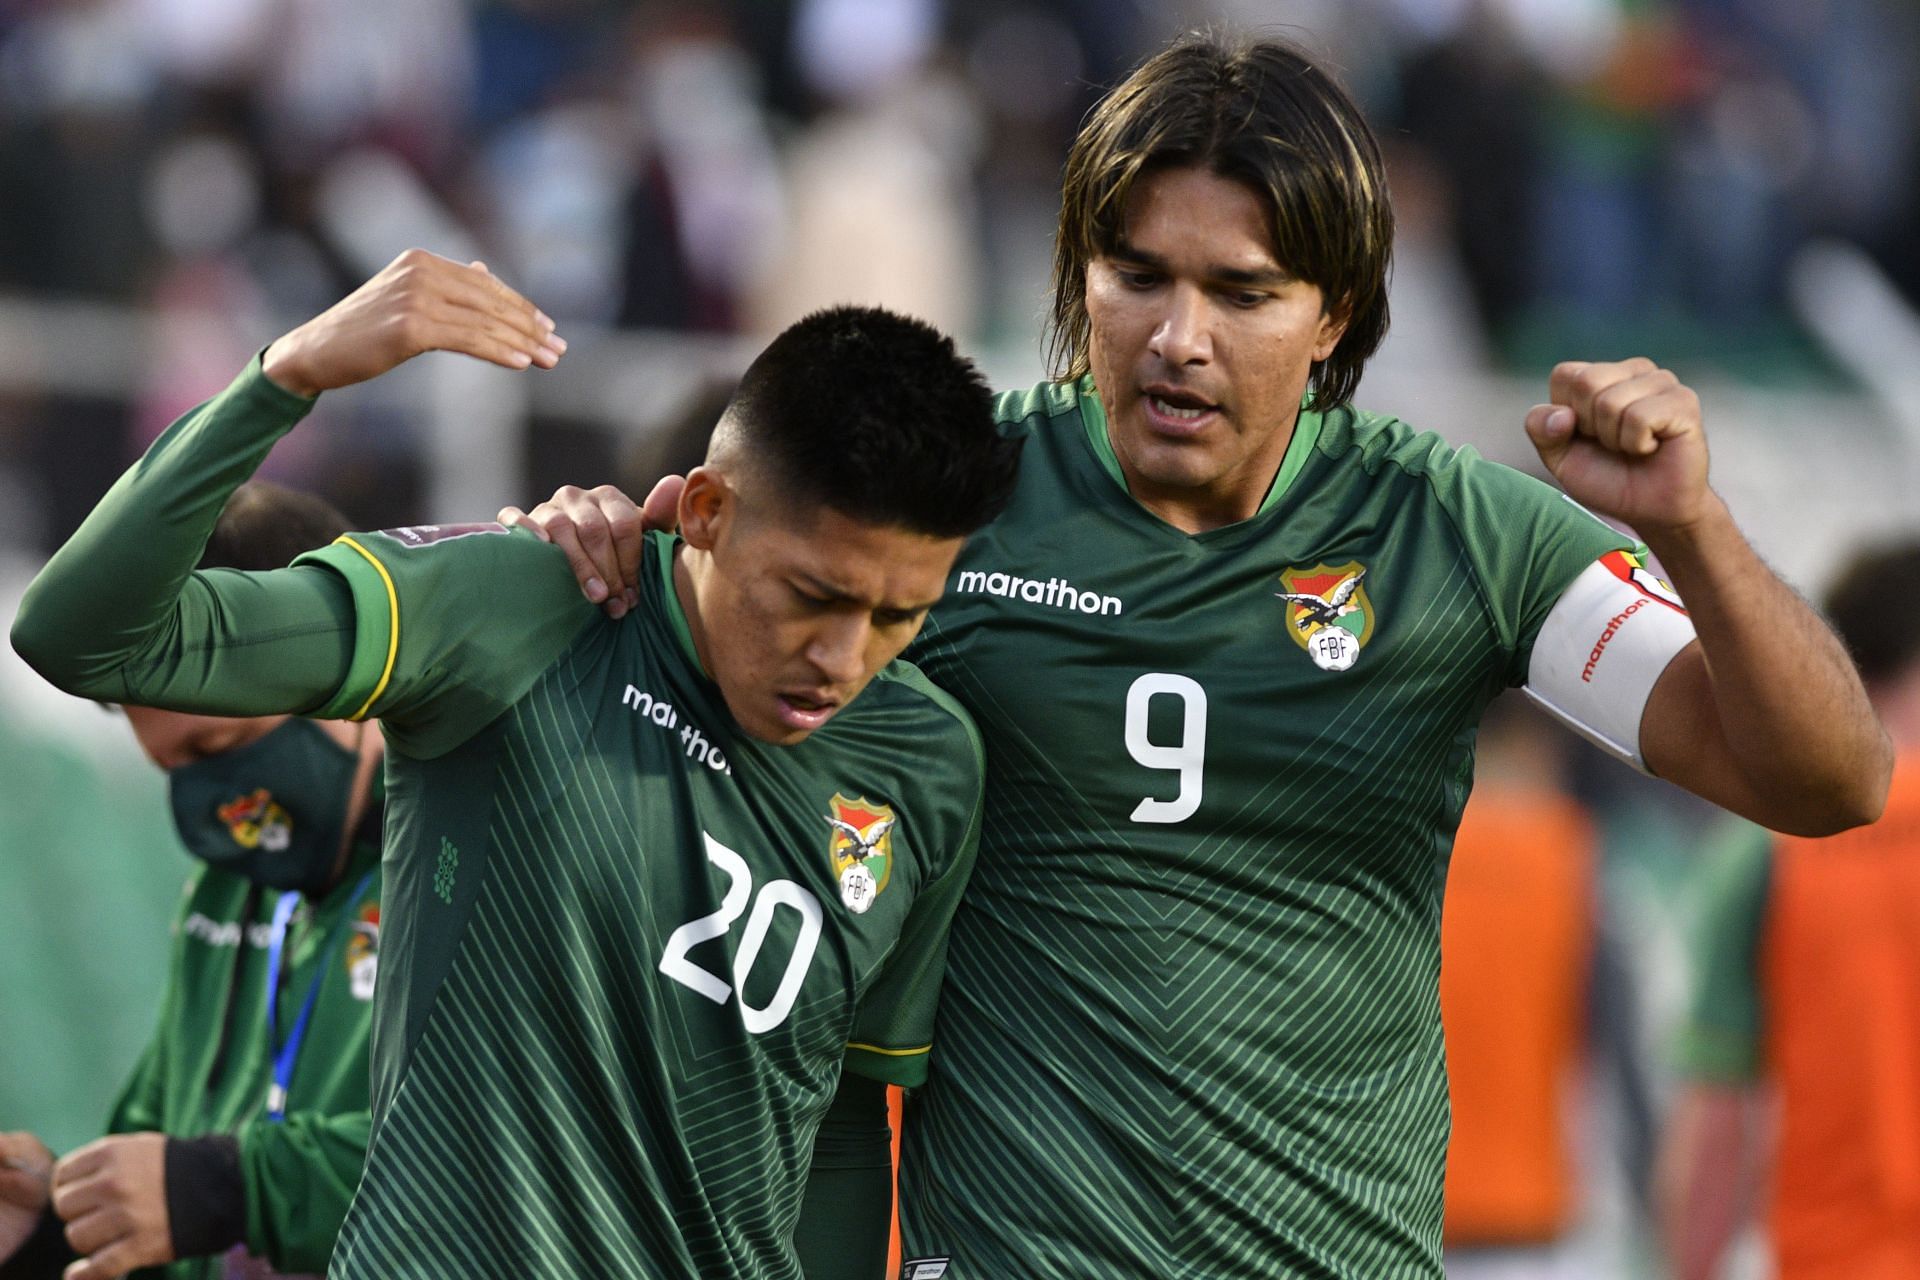 Bolivia host Trinidad and Tobago in a friendly fixture on Friday